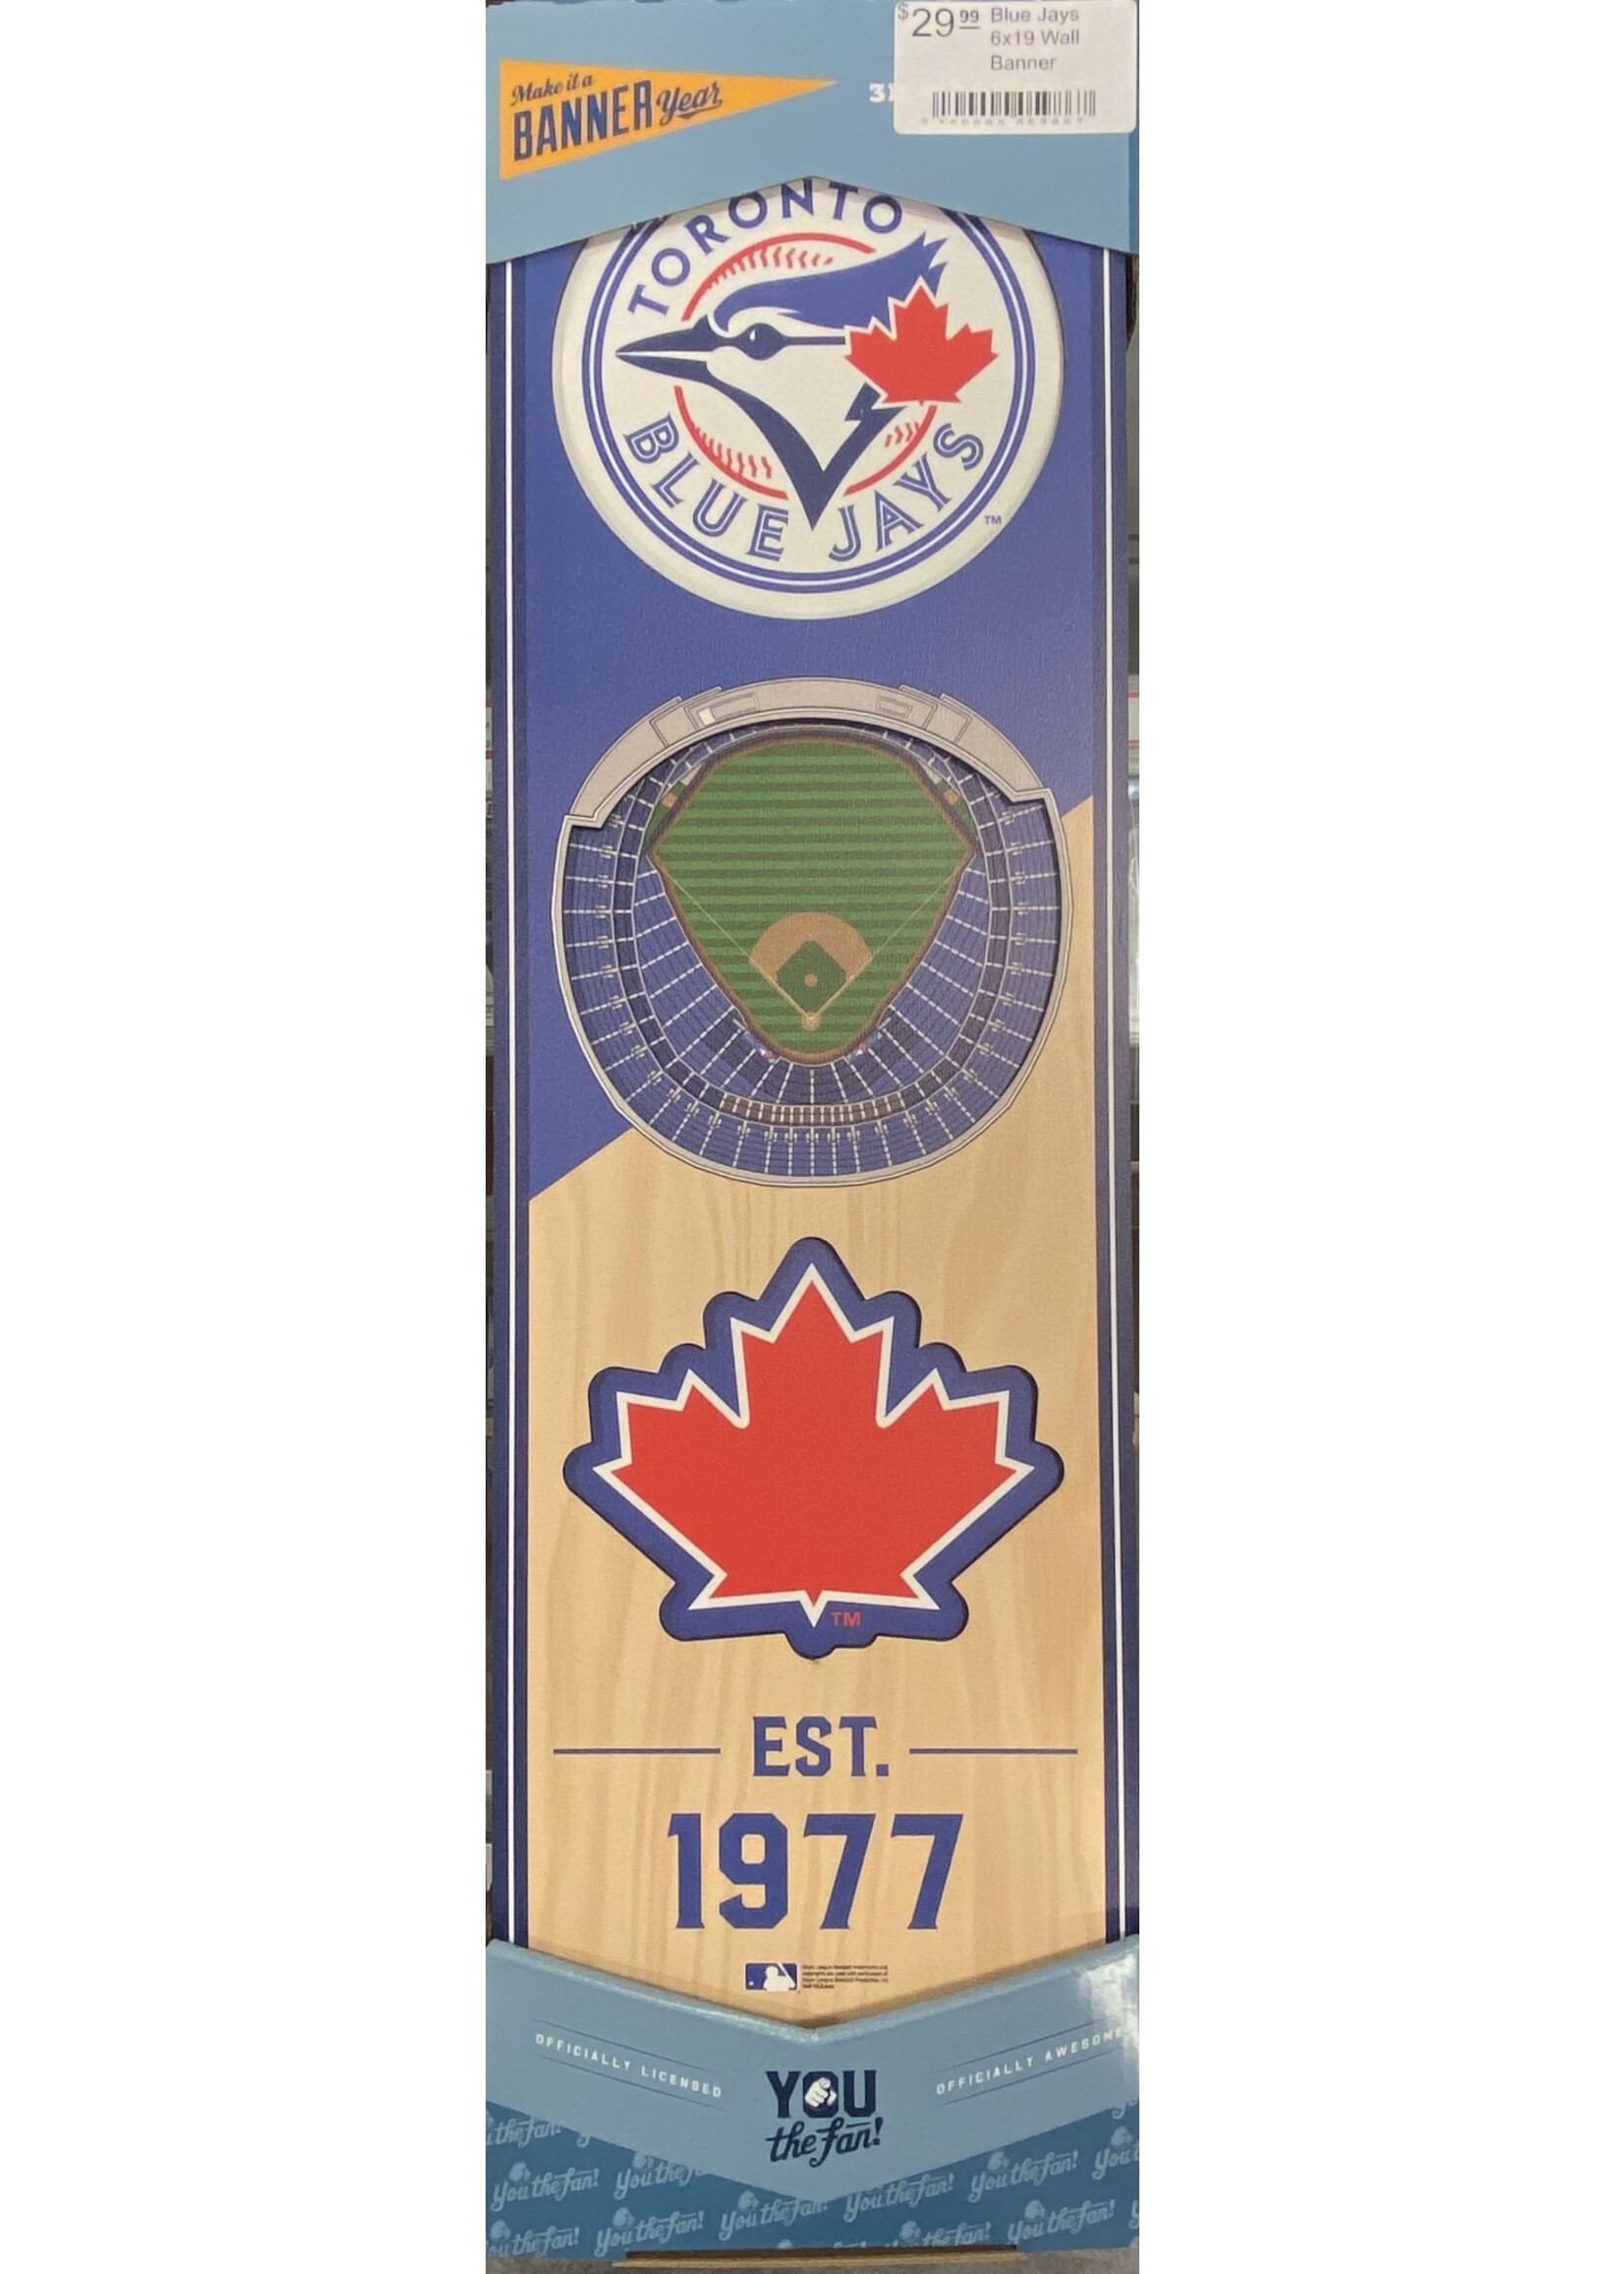 Blue Jays 6x19 Wall Banner